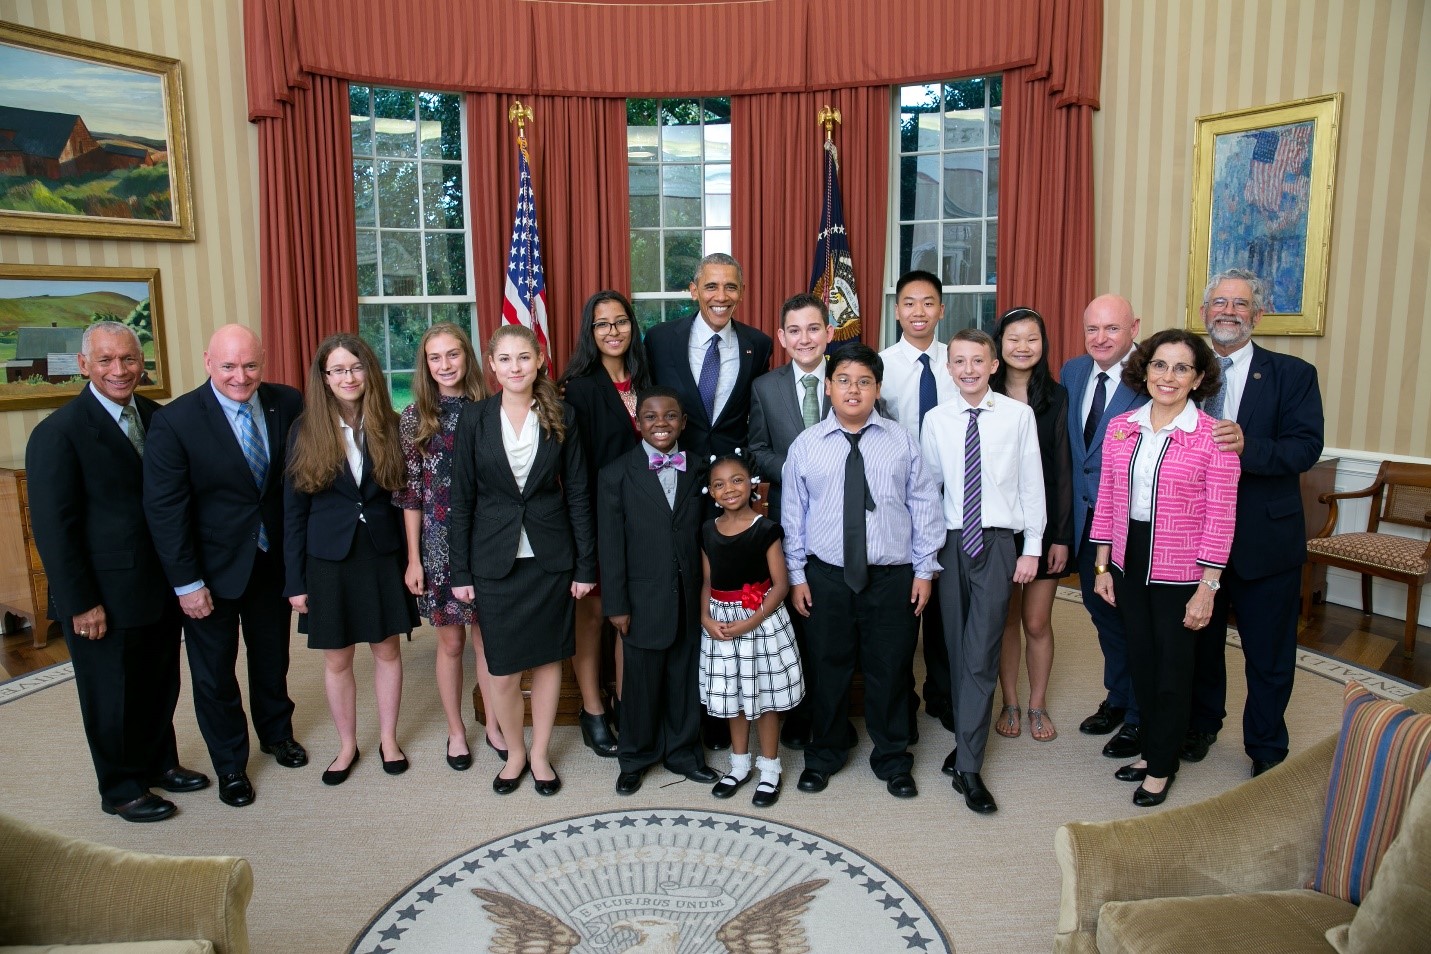 President Barack Obama joins Kids Science Advisors for a group photo in the Oval Office, Oct. 21, 2016. Also pictured are: retired NASA astronauts Scott Kelly (Captain, USN, Ret.) and his twin brother, Mark Kelly (Captain, USN, Ret.), NASA Administrator Charles Bolden; Dr. John Holdren, Director of the Office of Science and Technology Policy (OSTP) and National Science Foundation Director France Córdova. (Official White House Photo by Lawrence Jackson)